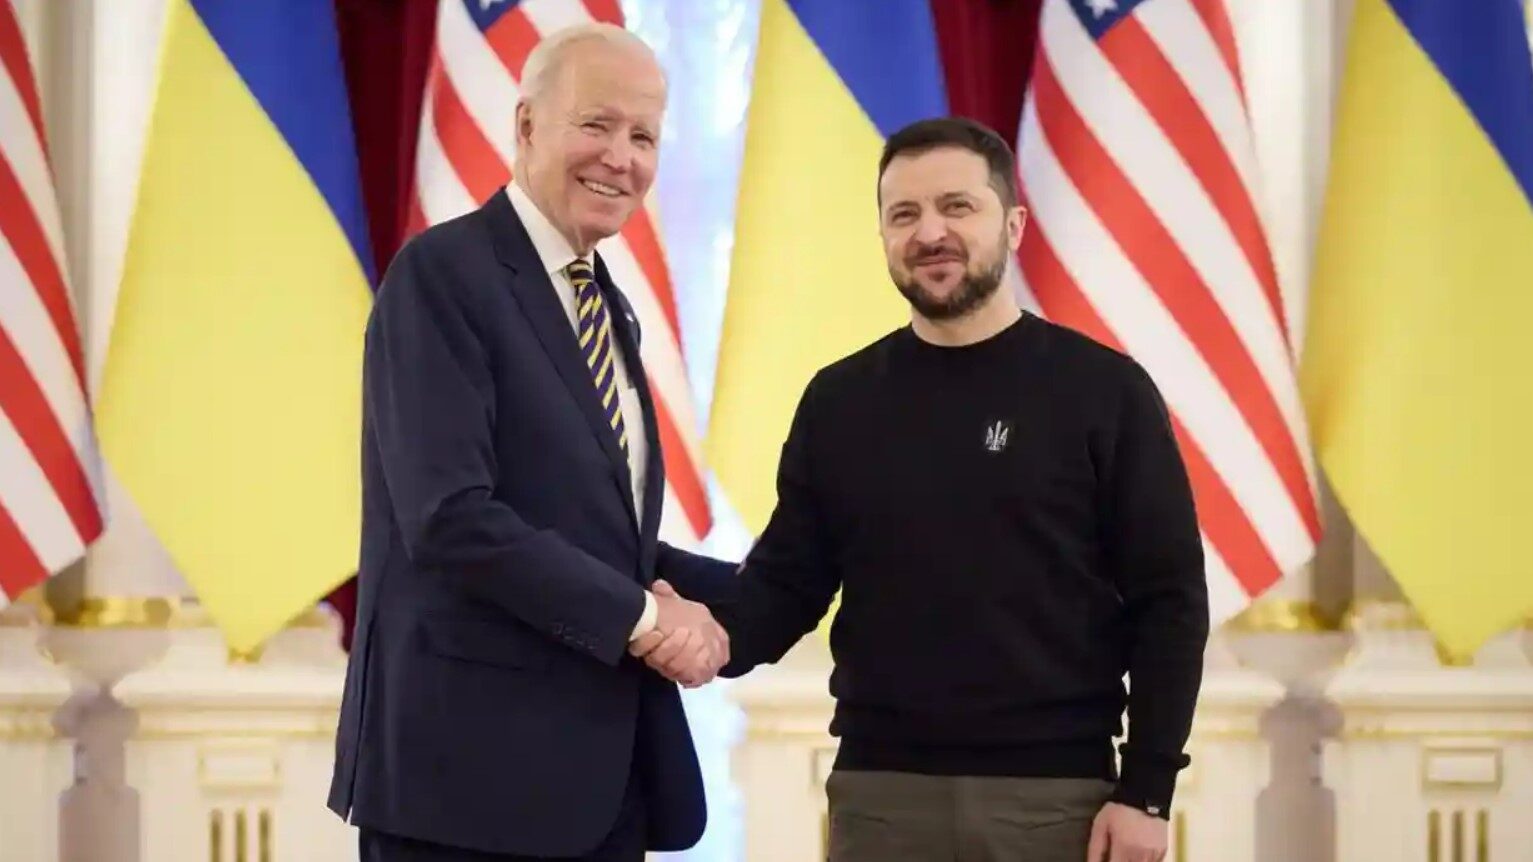 Biden Meets With Zelenskyy on Unannounced Kyiv Visit, Israeli Lawmakers Also Visit